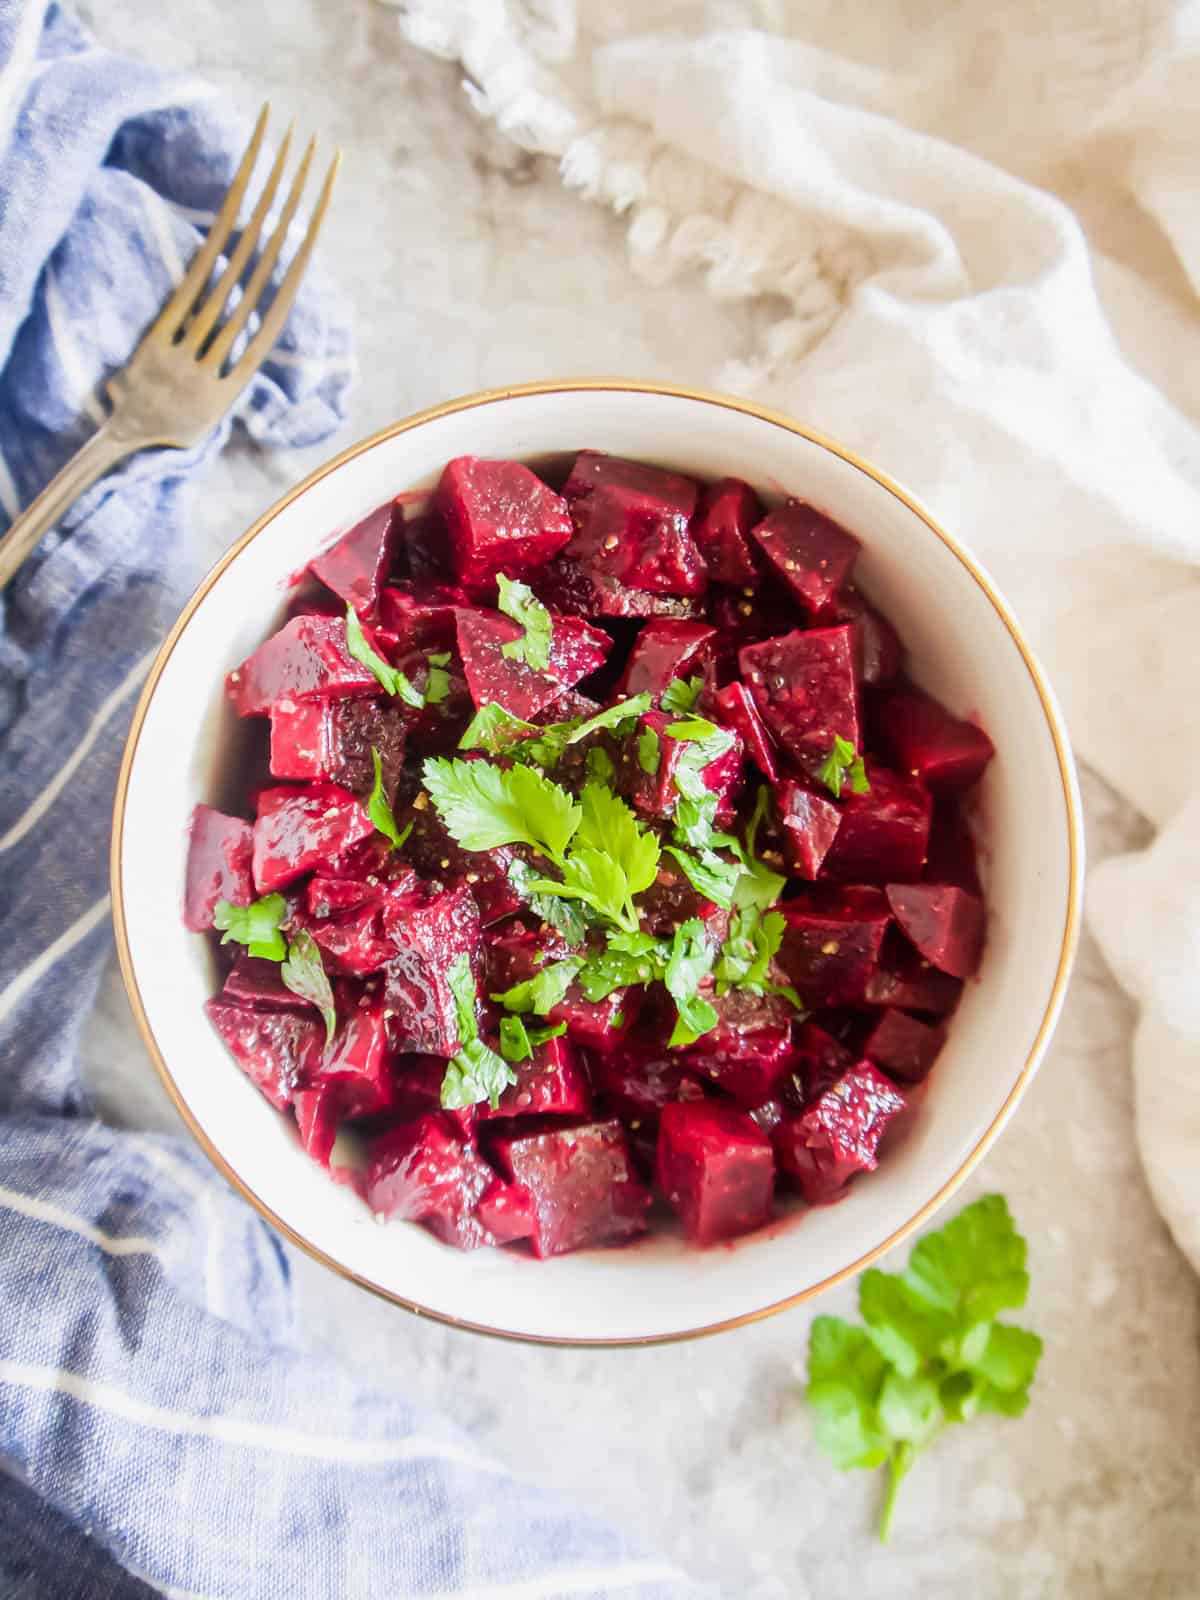 Simple beet salad in a bowl.